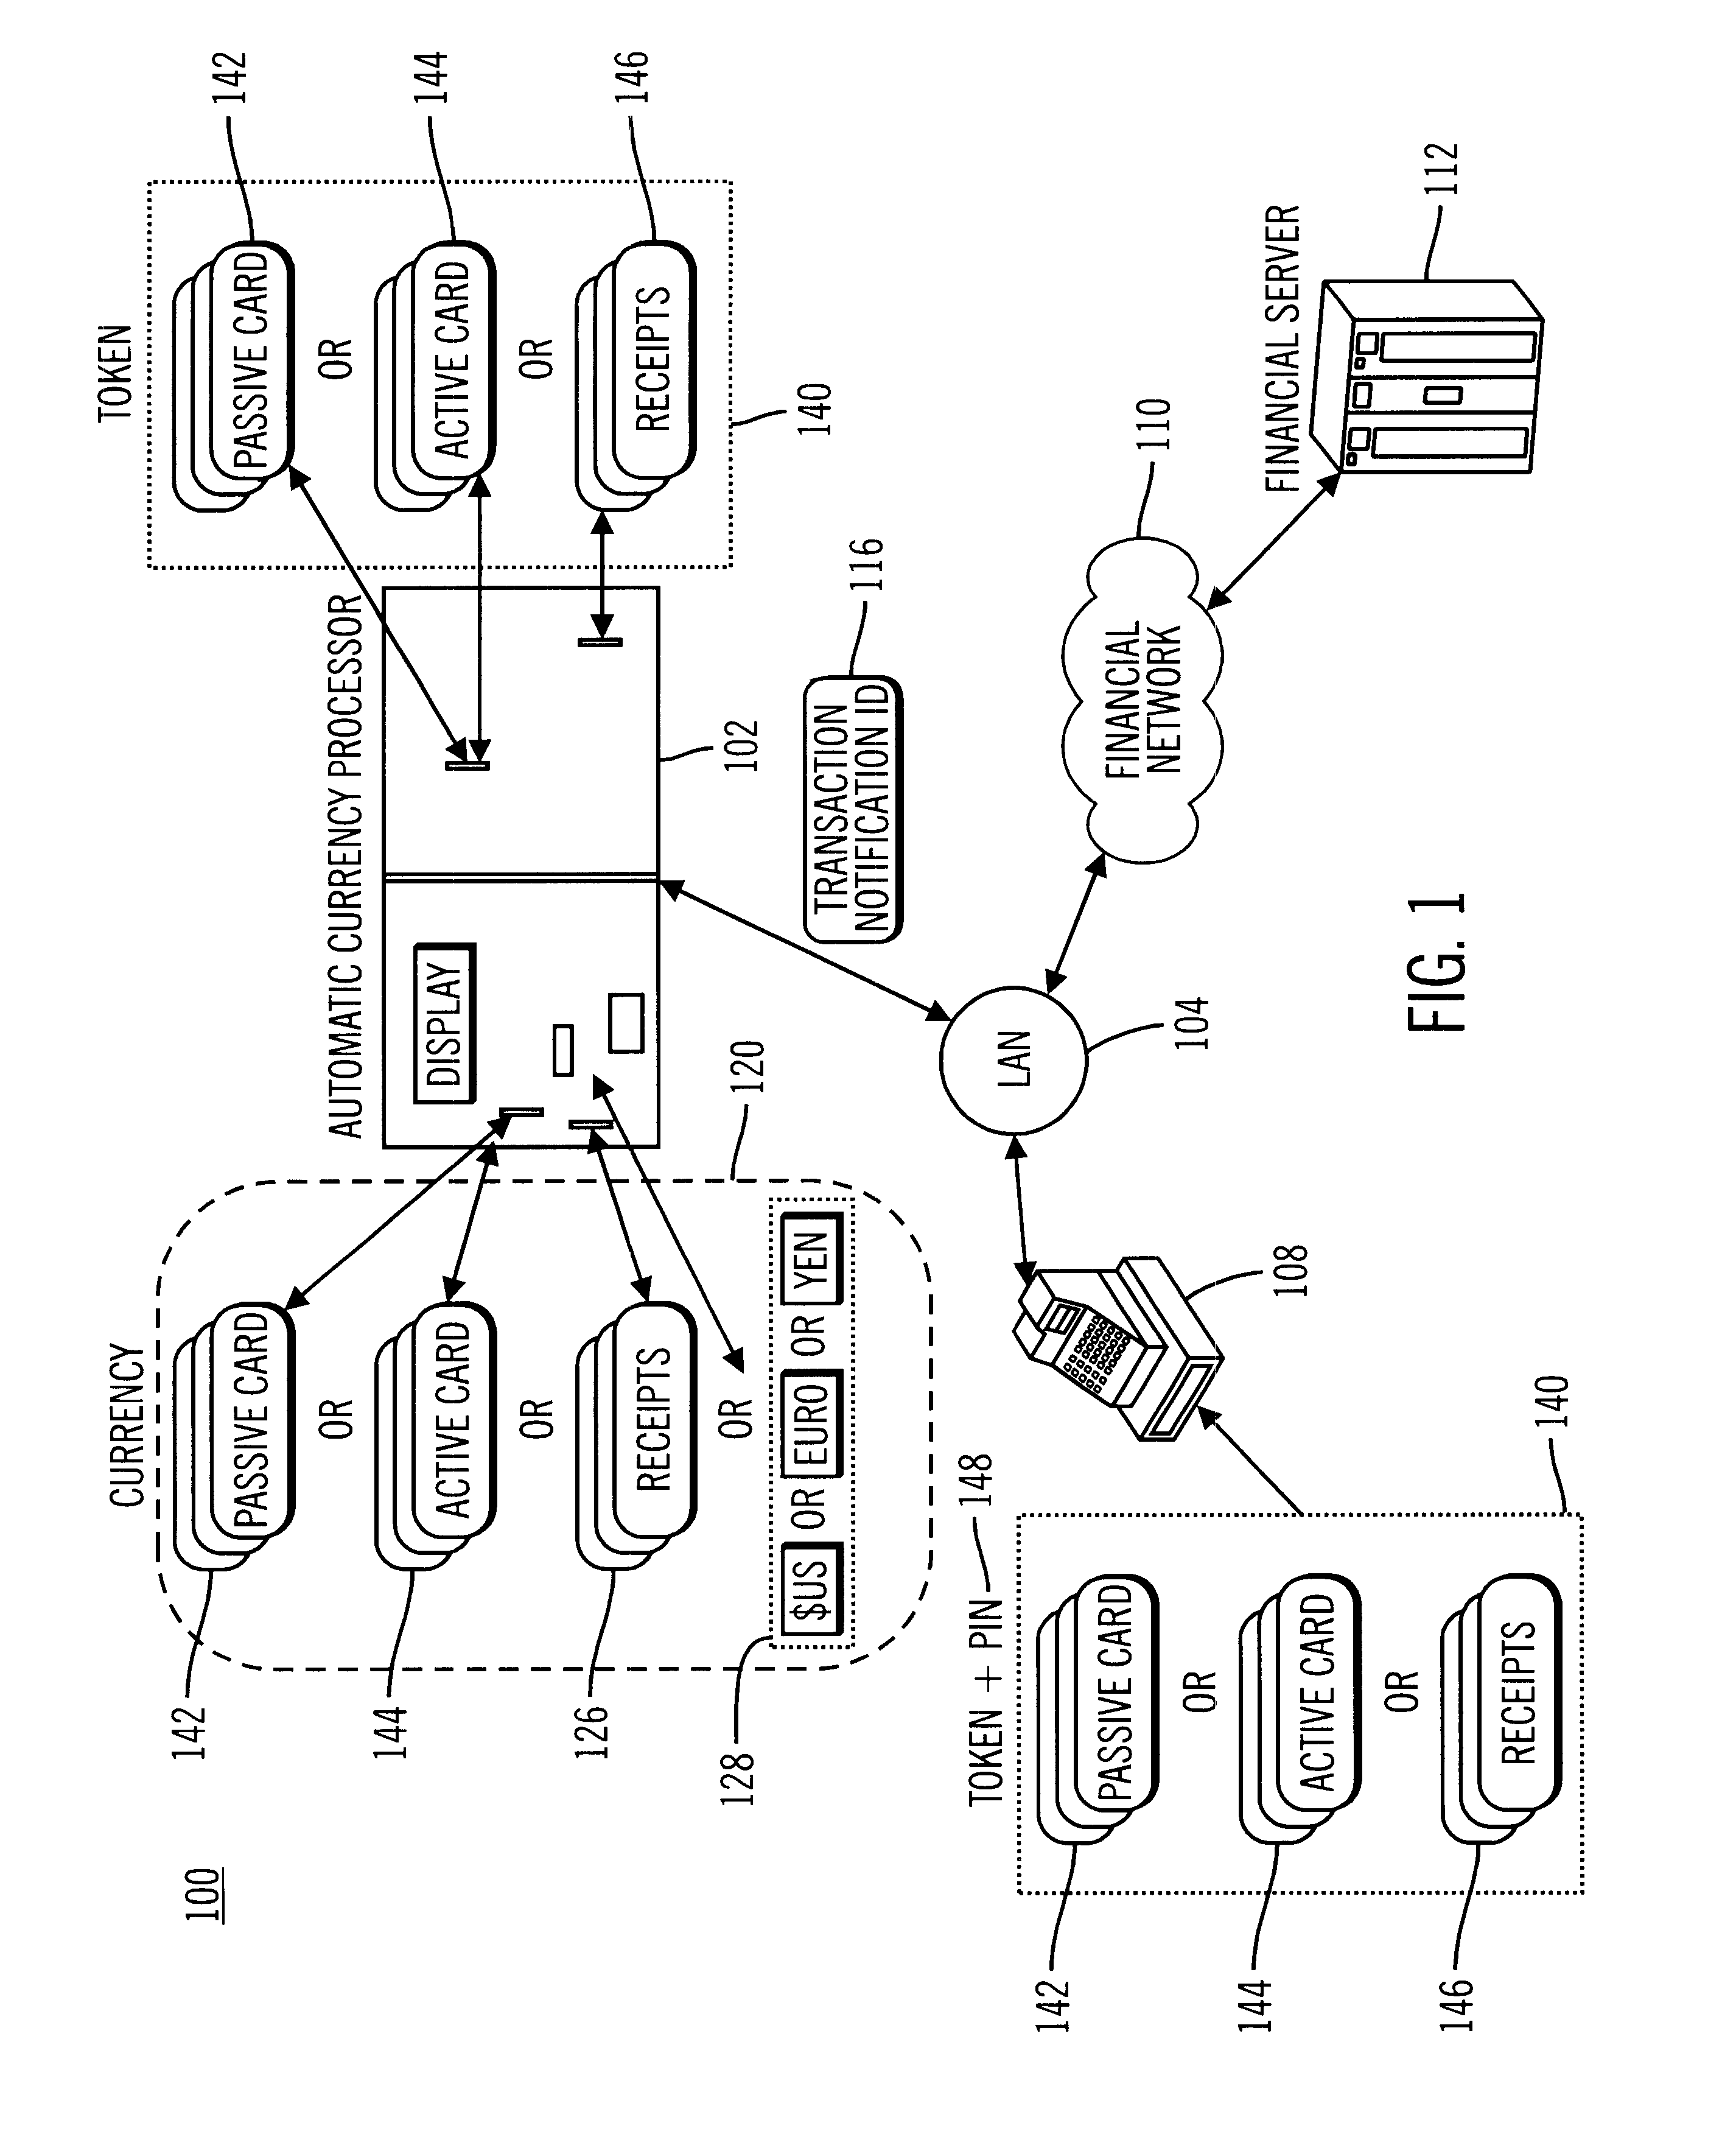 Multiple denomination currency receiving and prepaid card dispensing method and apparatus